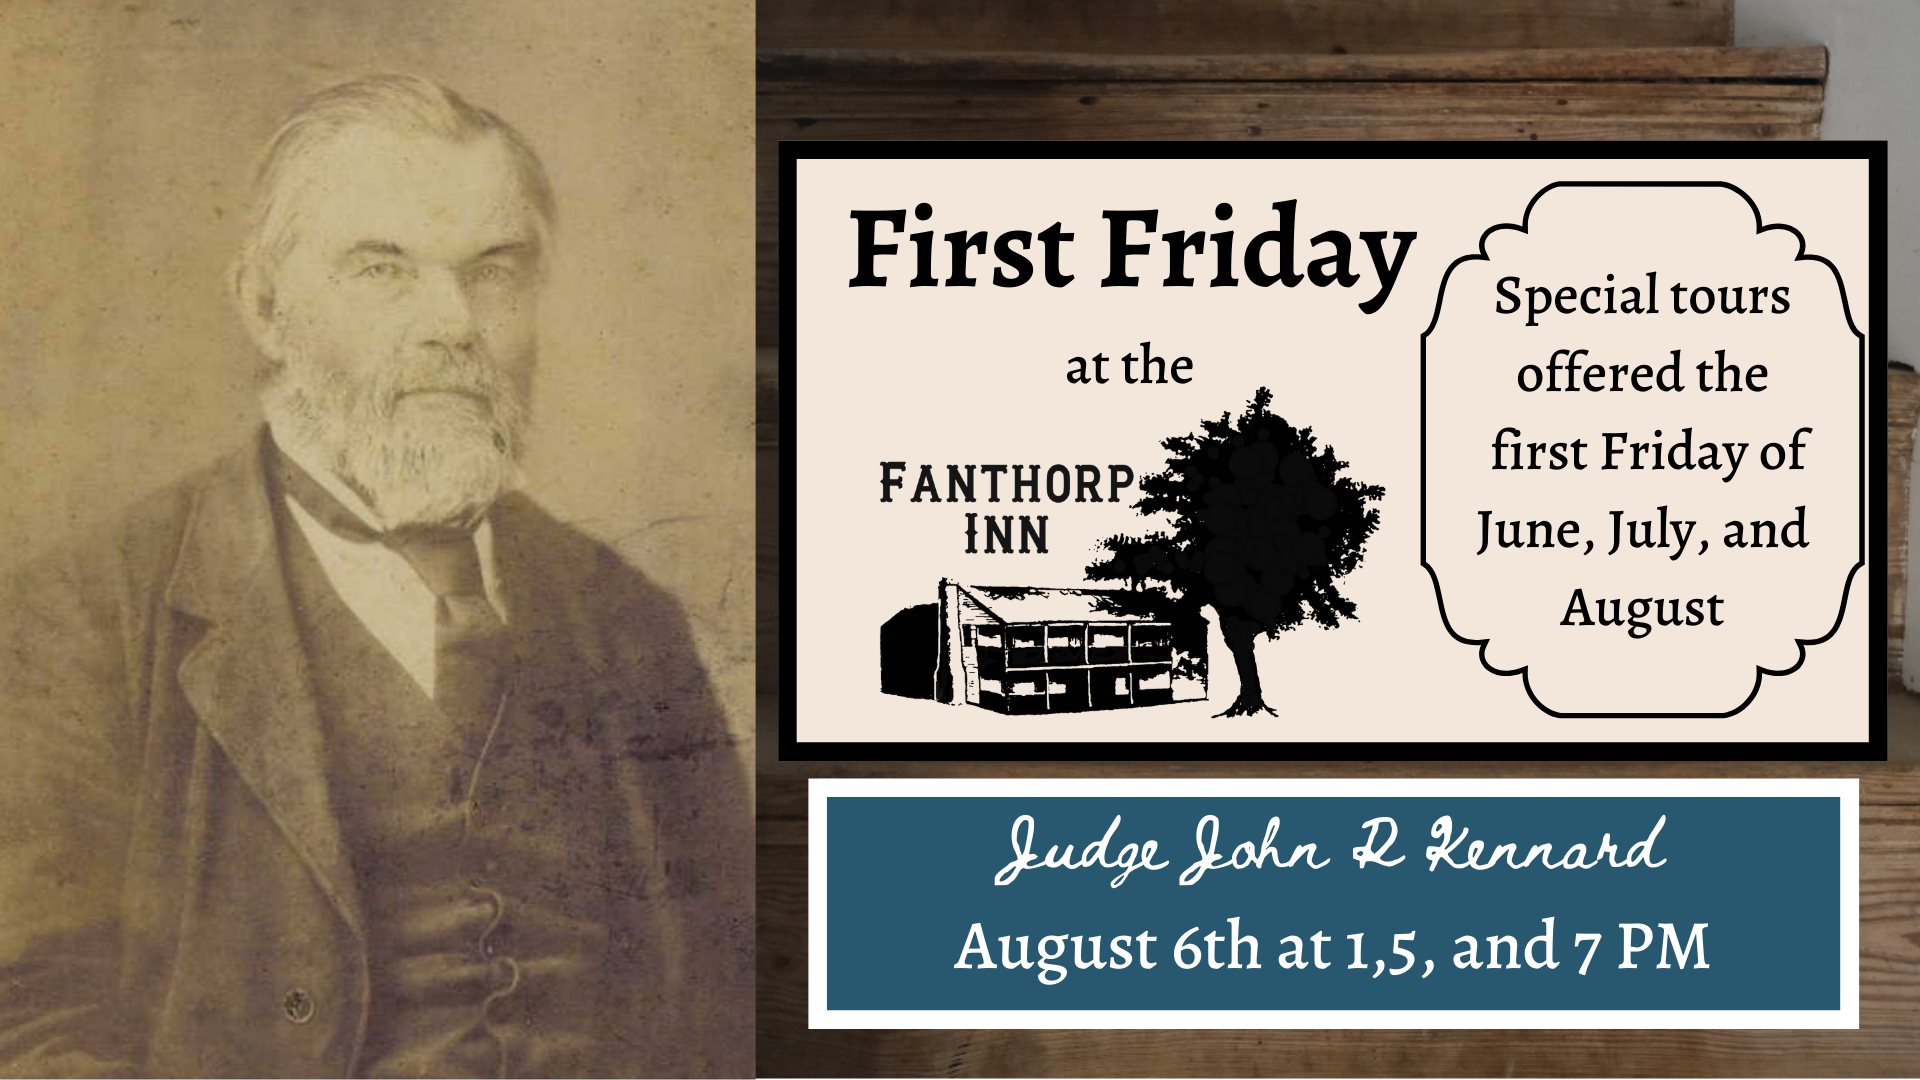 First Friday at Fanthorp Inn